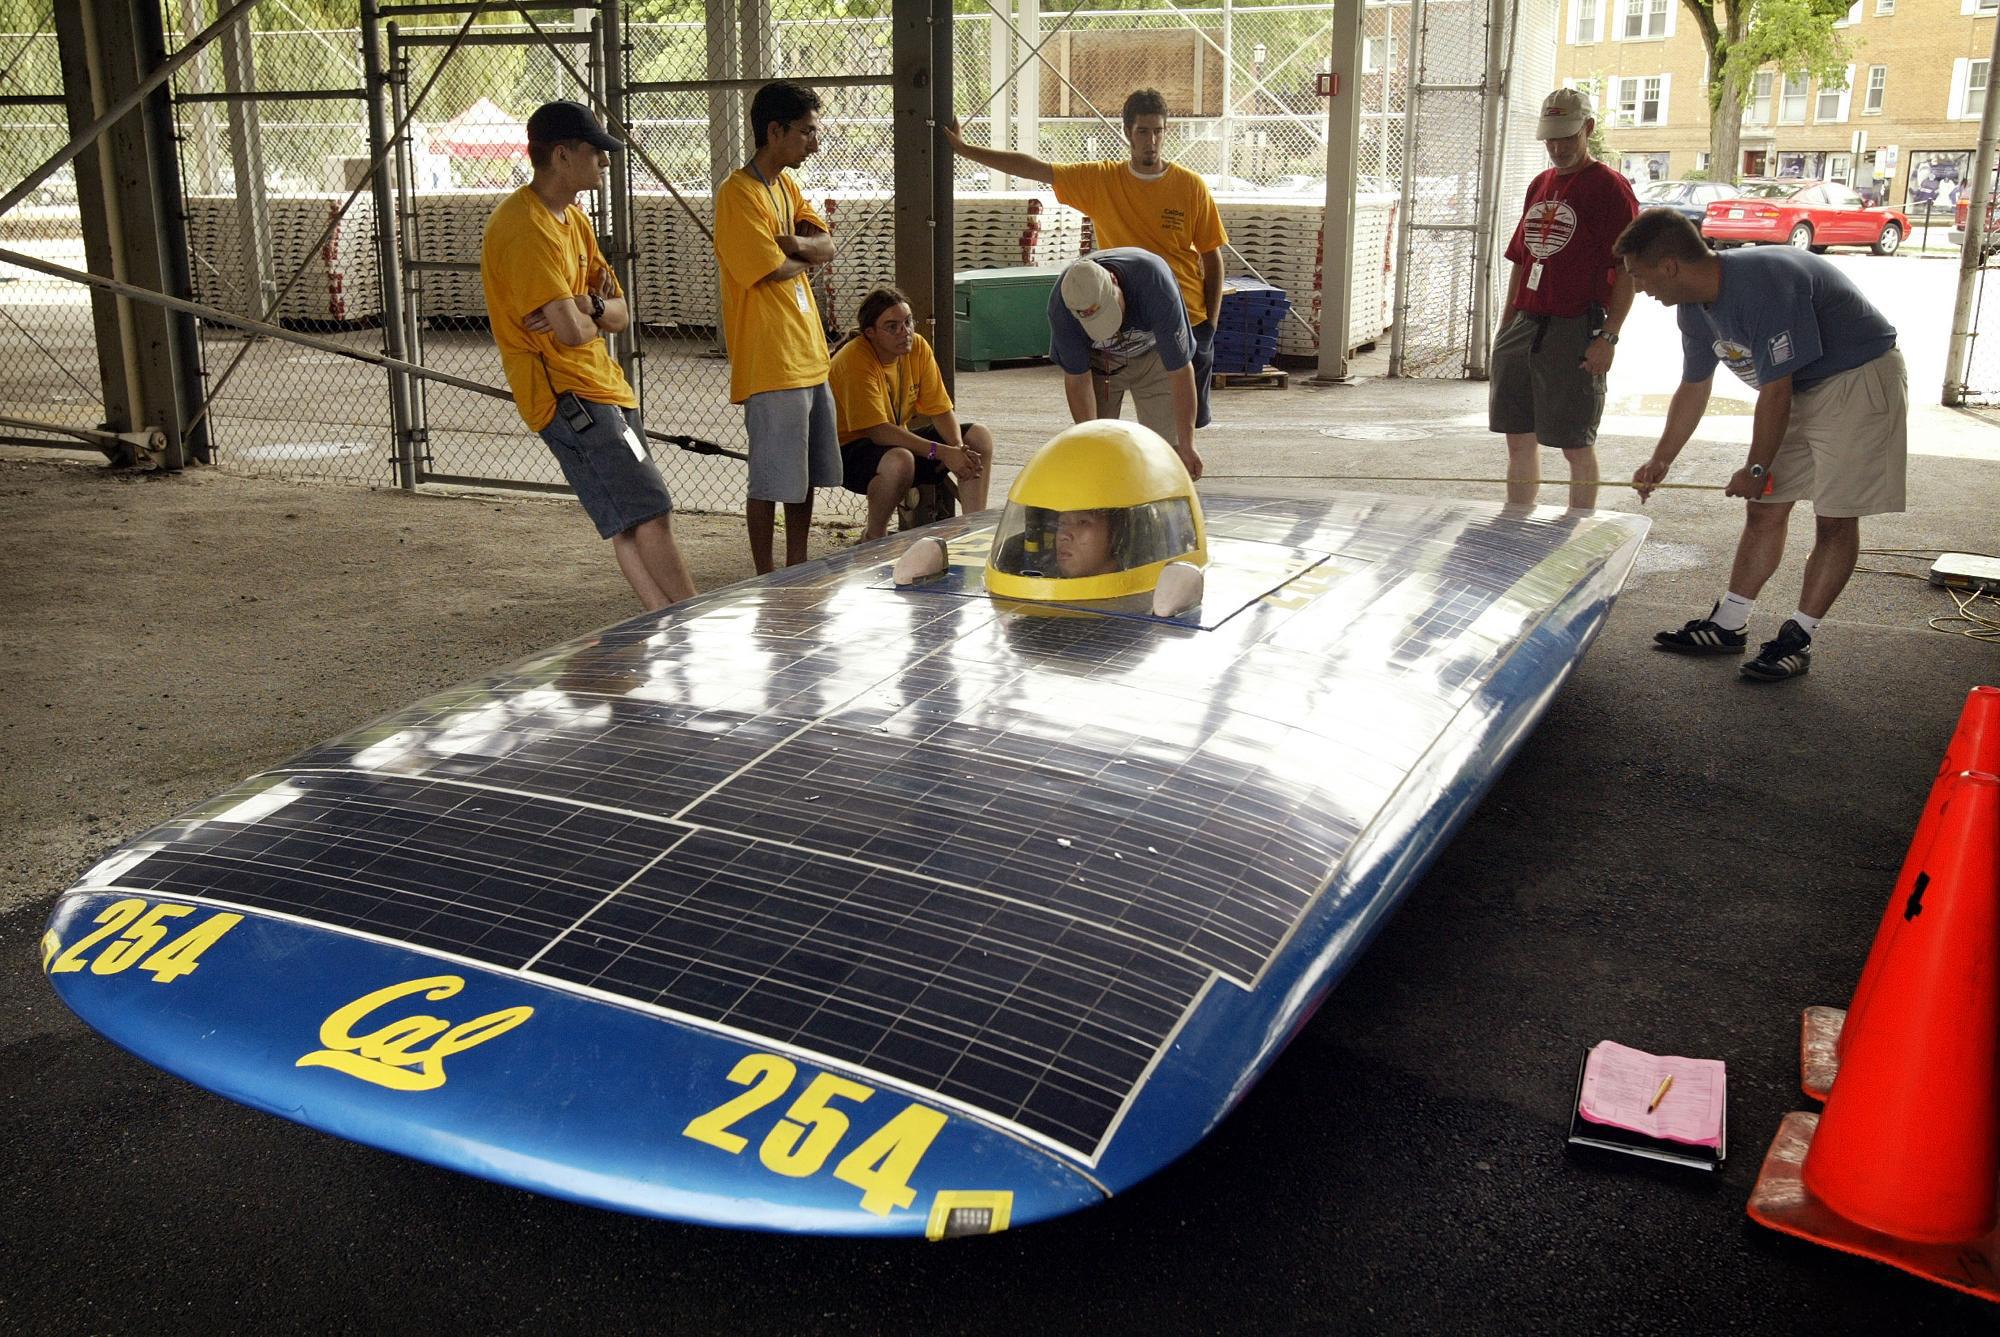 Students from the University of California push the "Solar Bear" their entry in the solar power auto race